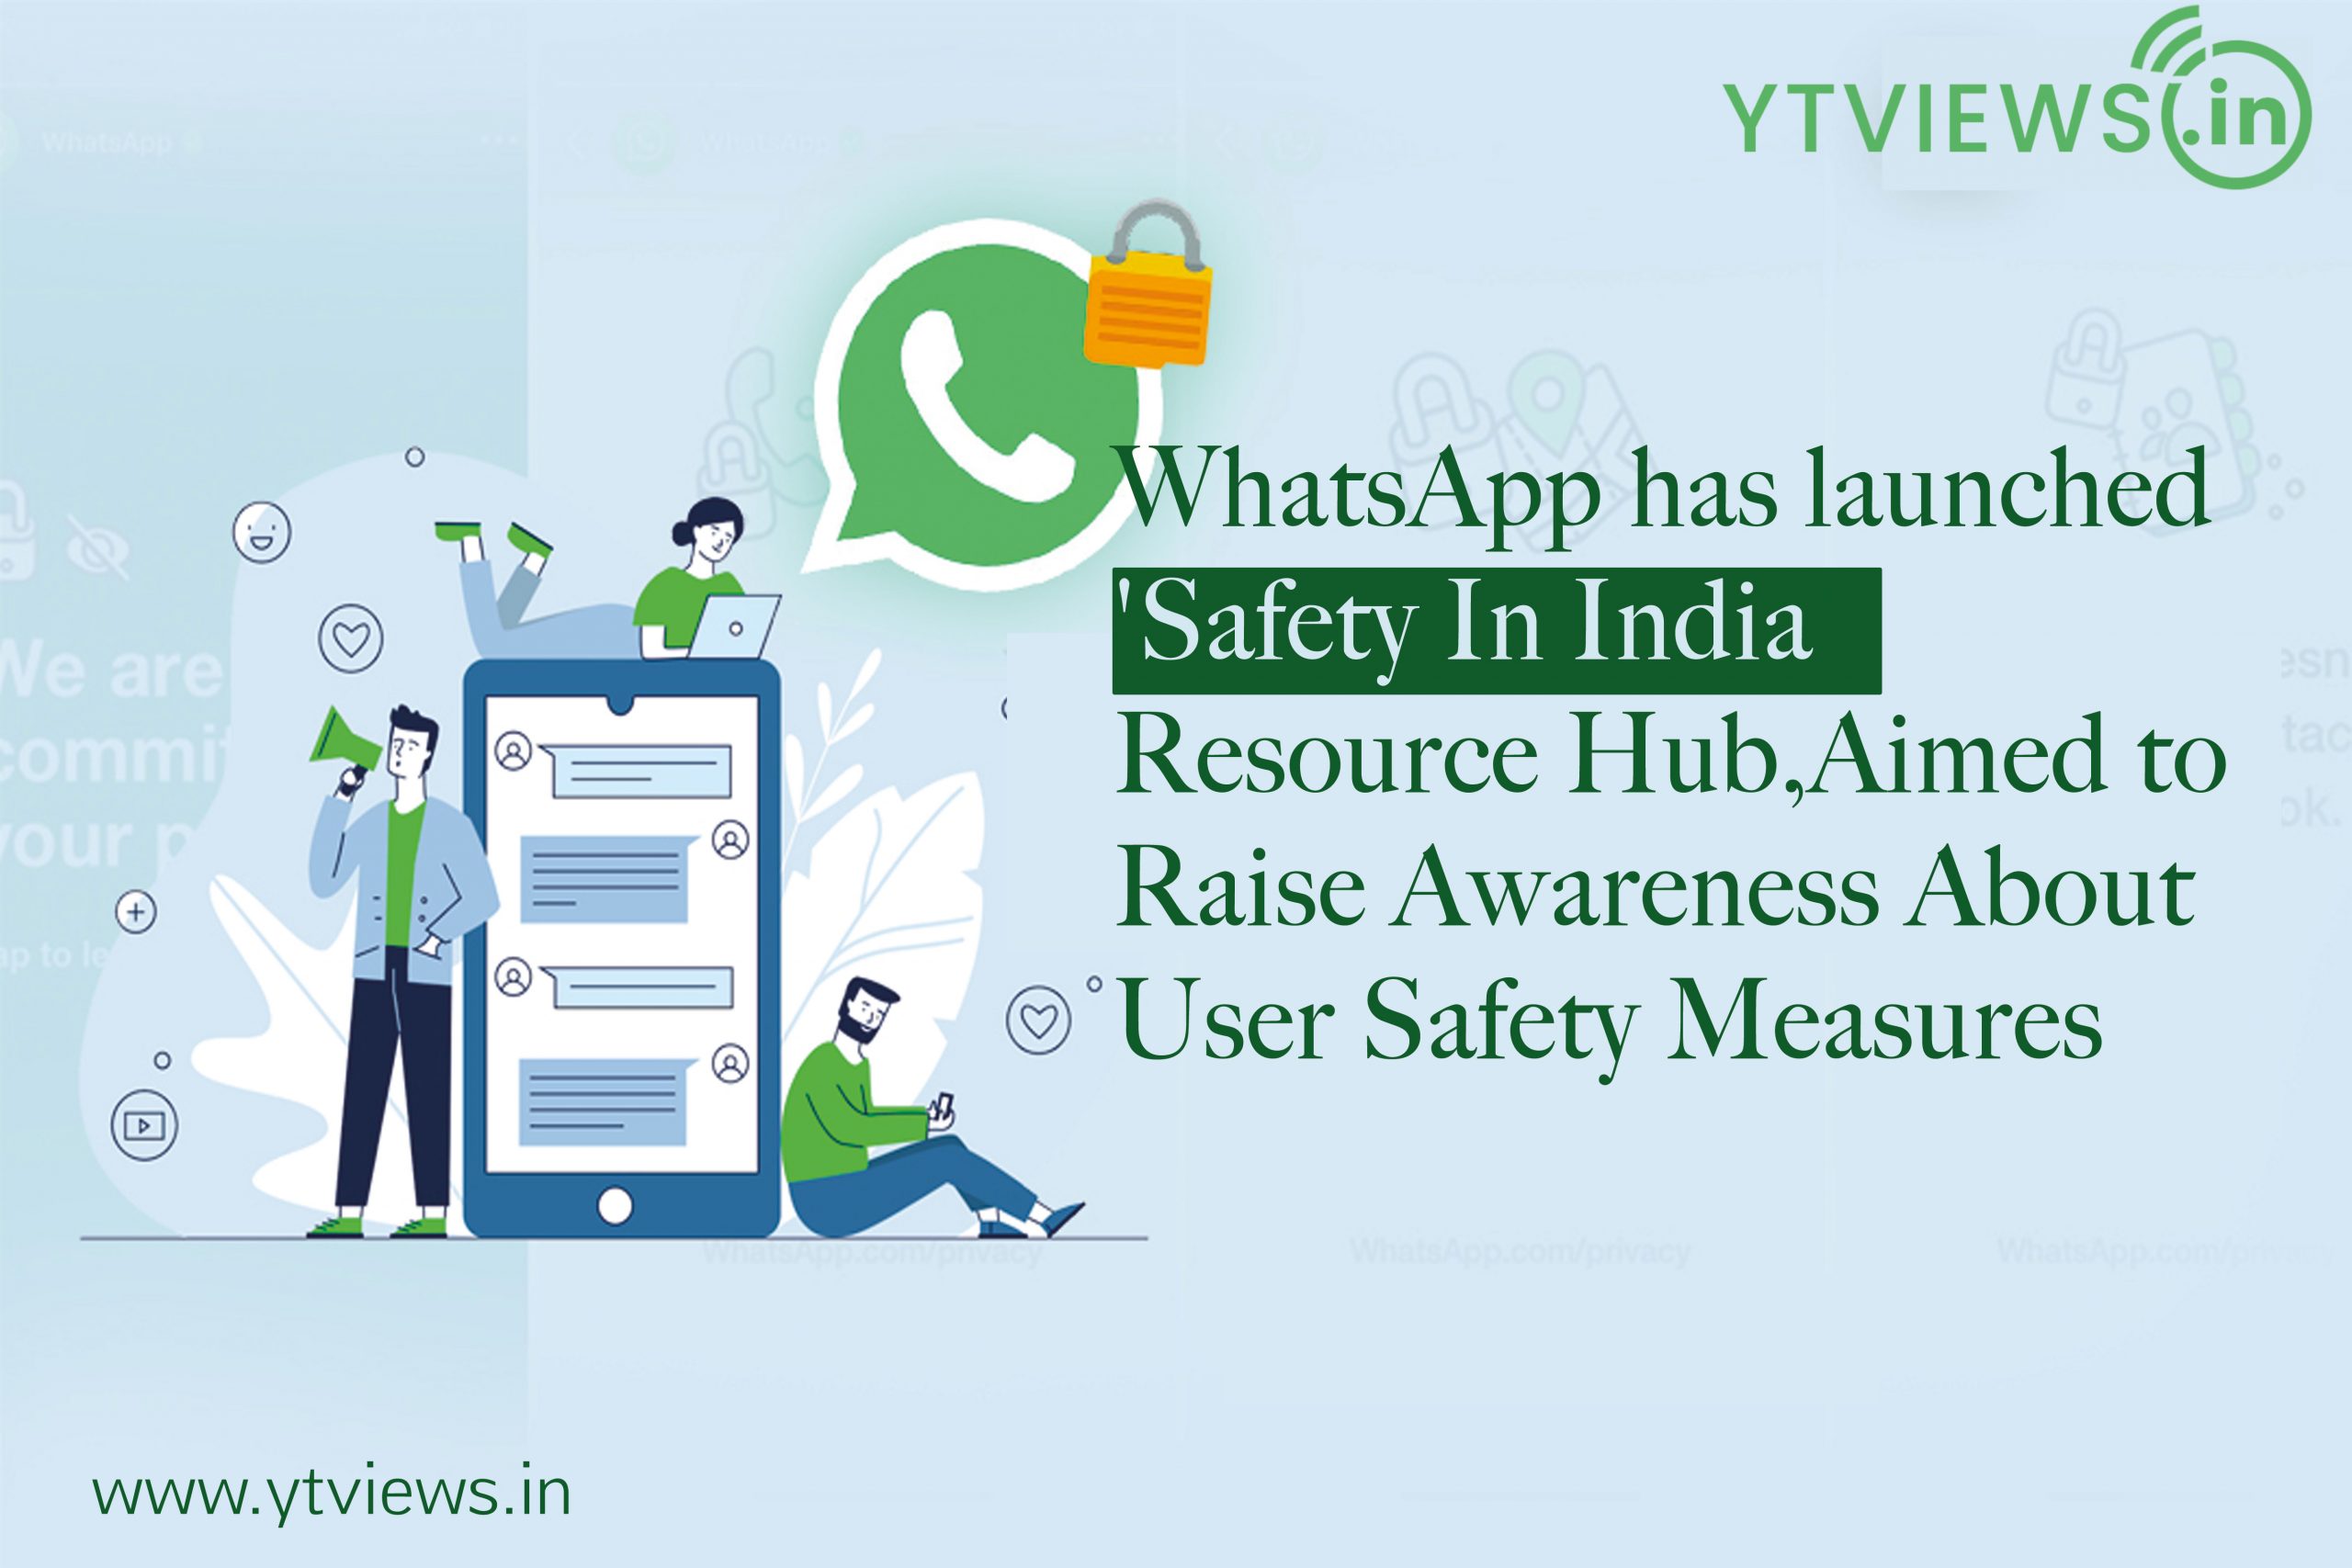 Whatsapp has launched a ‘Safety in India’ resource hub, aimed to raise awareness about user safety measures.